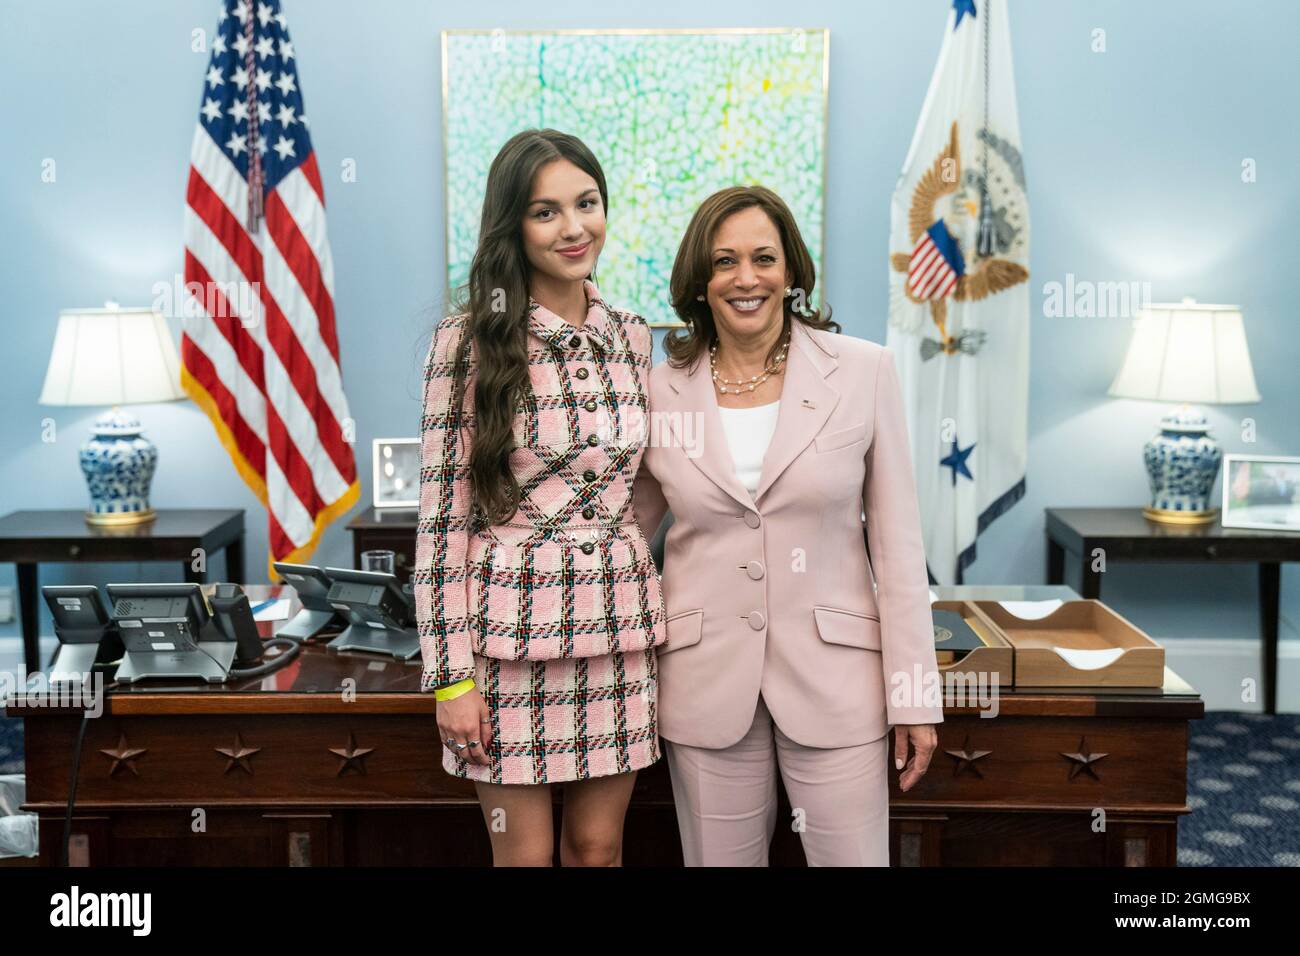 U.S Vice President Kamala Harris poses for photos with teen pop star Olivia Rodrigo in the West Wing Office of the White House July 14, 2021 in Washington, D.C. Rodrigo visited the White House to film a video promoting vaccines to young people.  Credit: Lawrence Jackson/White House Photo/Alamy Live News Stock Photo